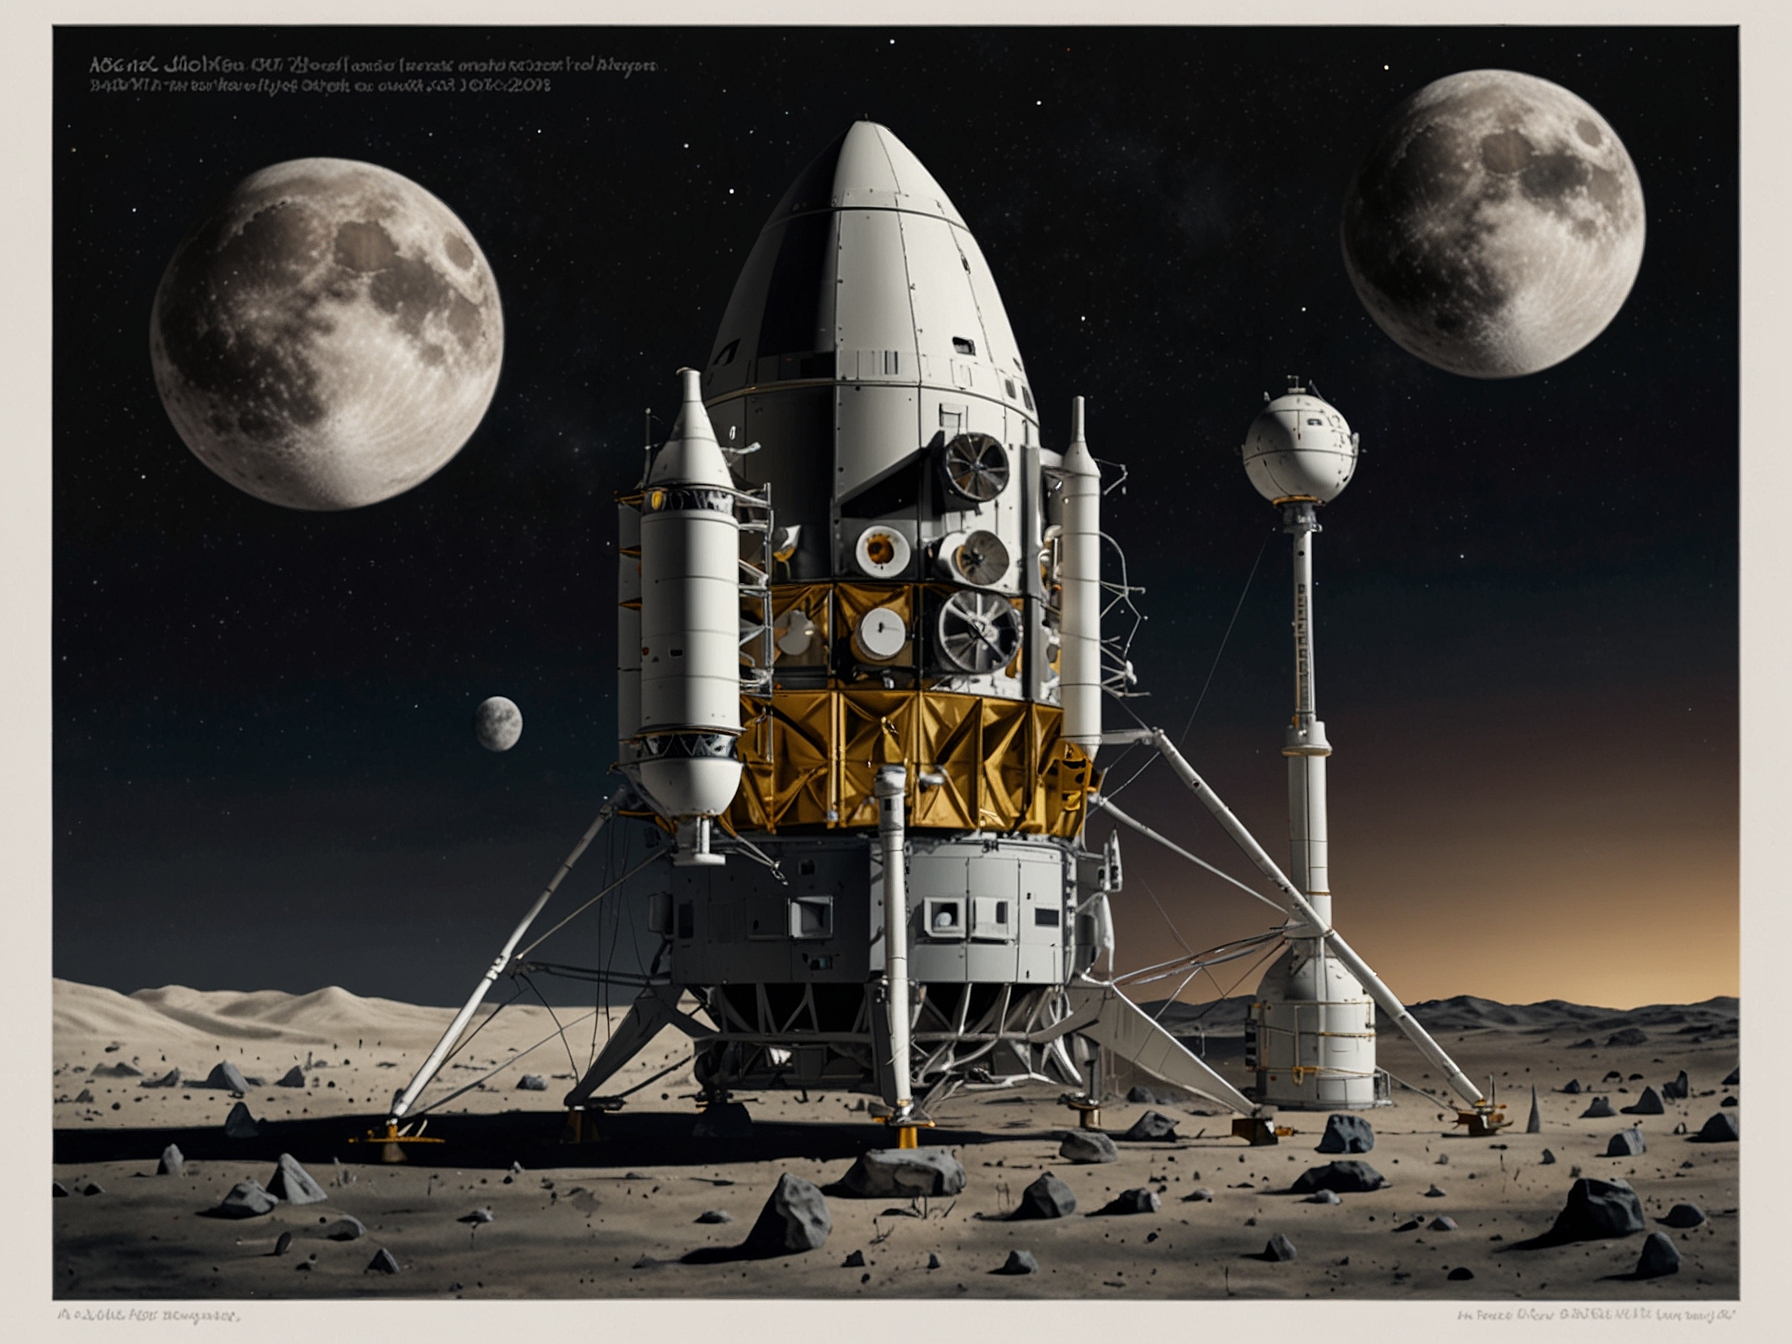 Graphic showing the moon with various spacecraft and habitat modules being developed for NASA's Artemis program, showcasing contributions from multiple private firms.